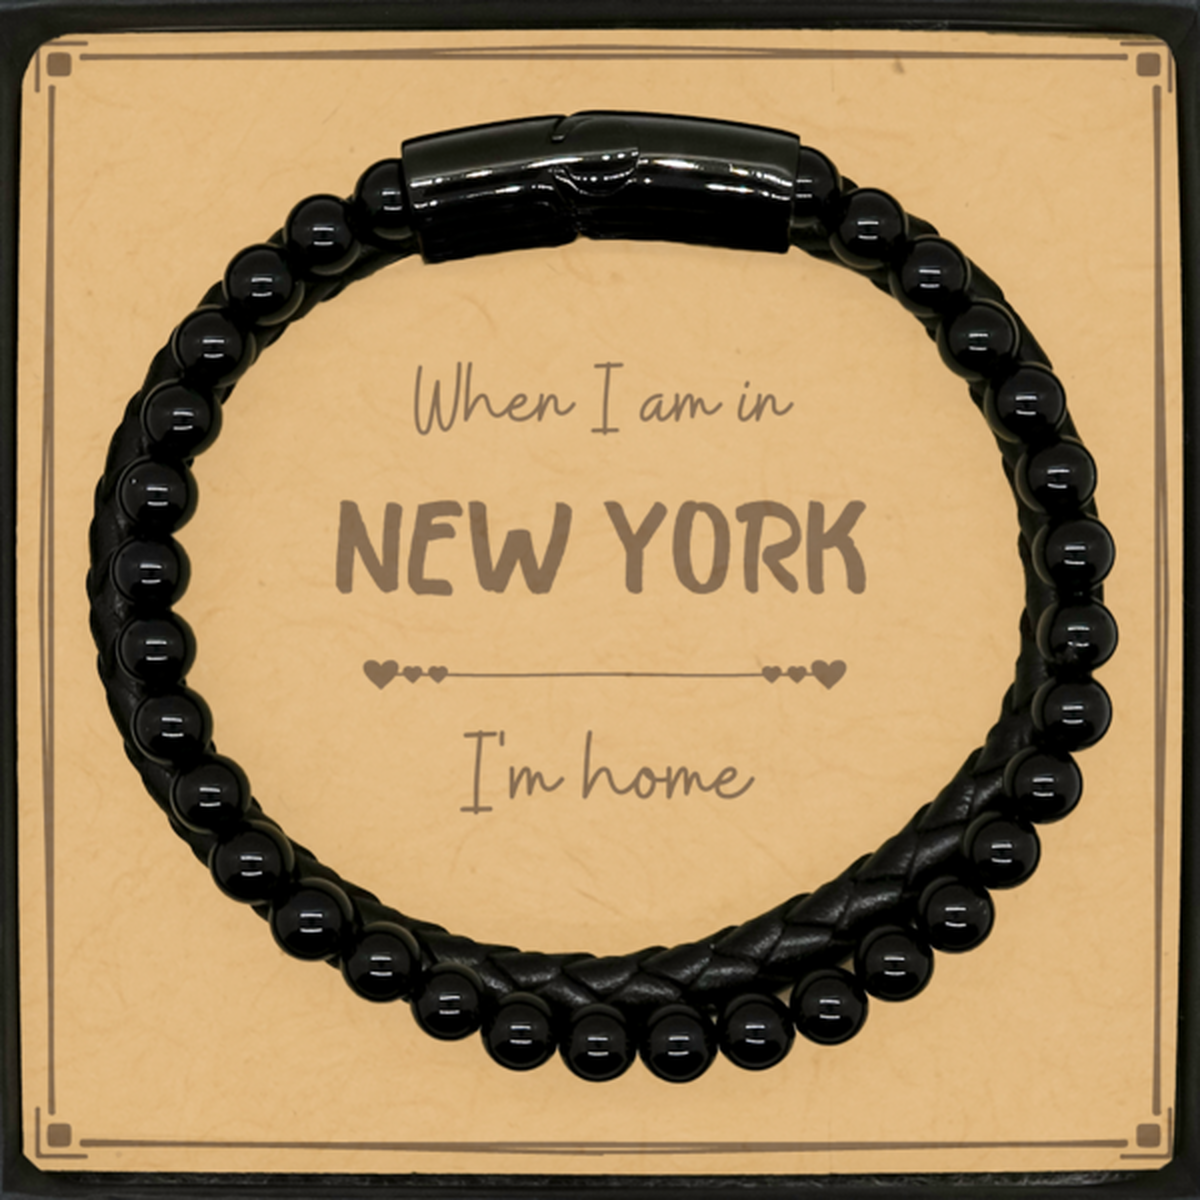 When I am in New York I'm home Stone Leather Bracelets, Message Card Gifts For New York, State New York Birthday Gifts for Friends Coworker